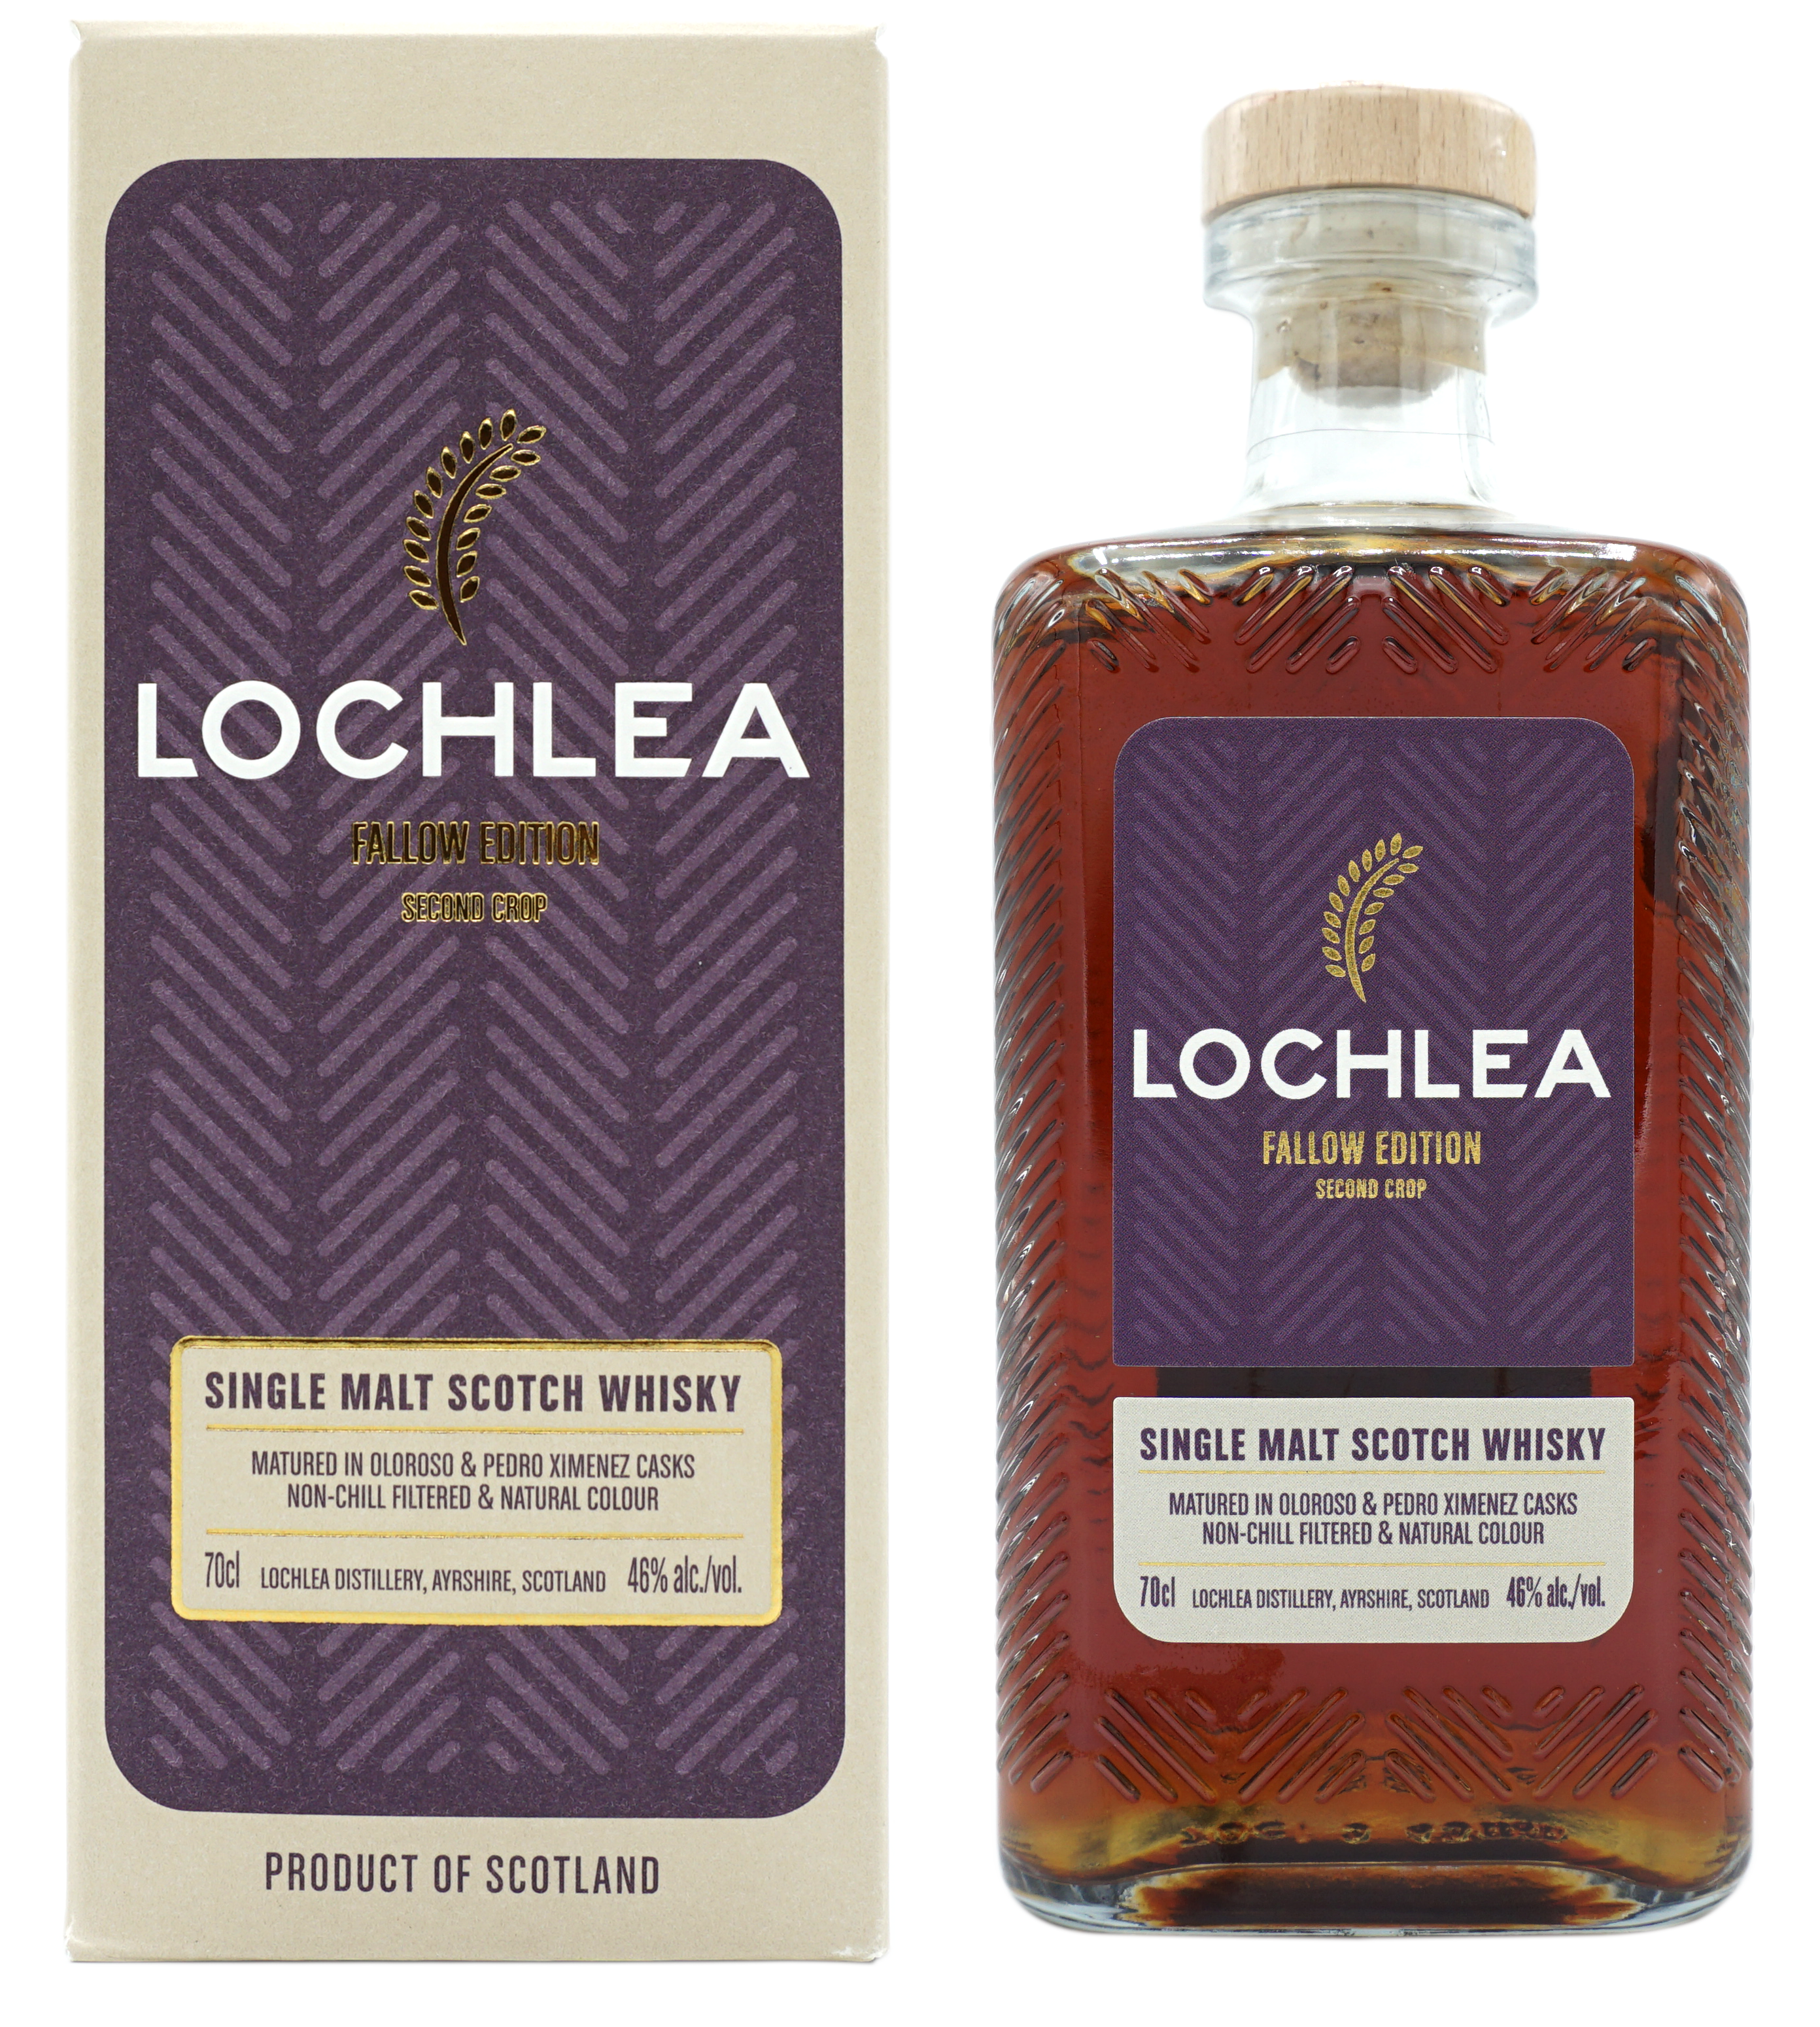 Lochlea FallowEdition SeconCrop 46% Compleet